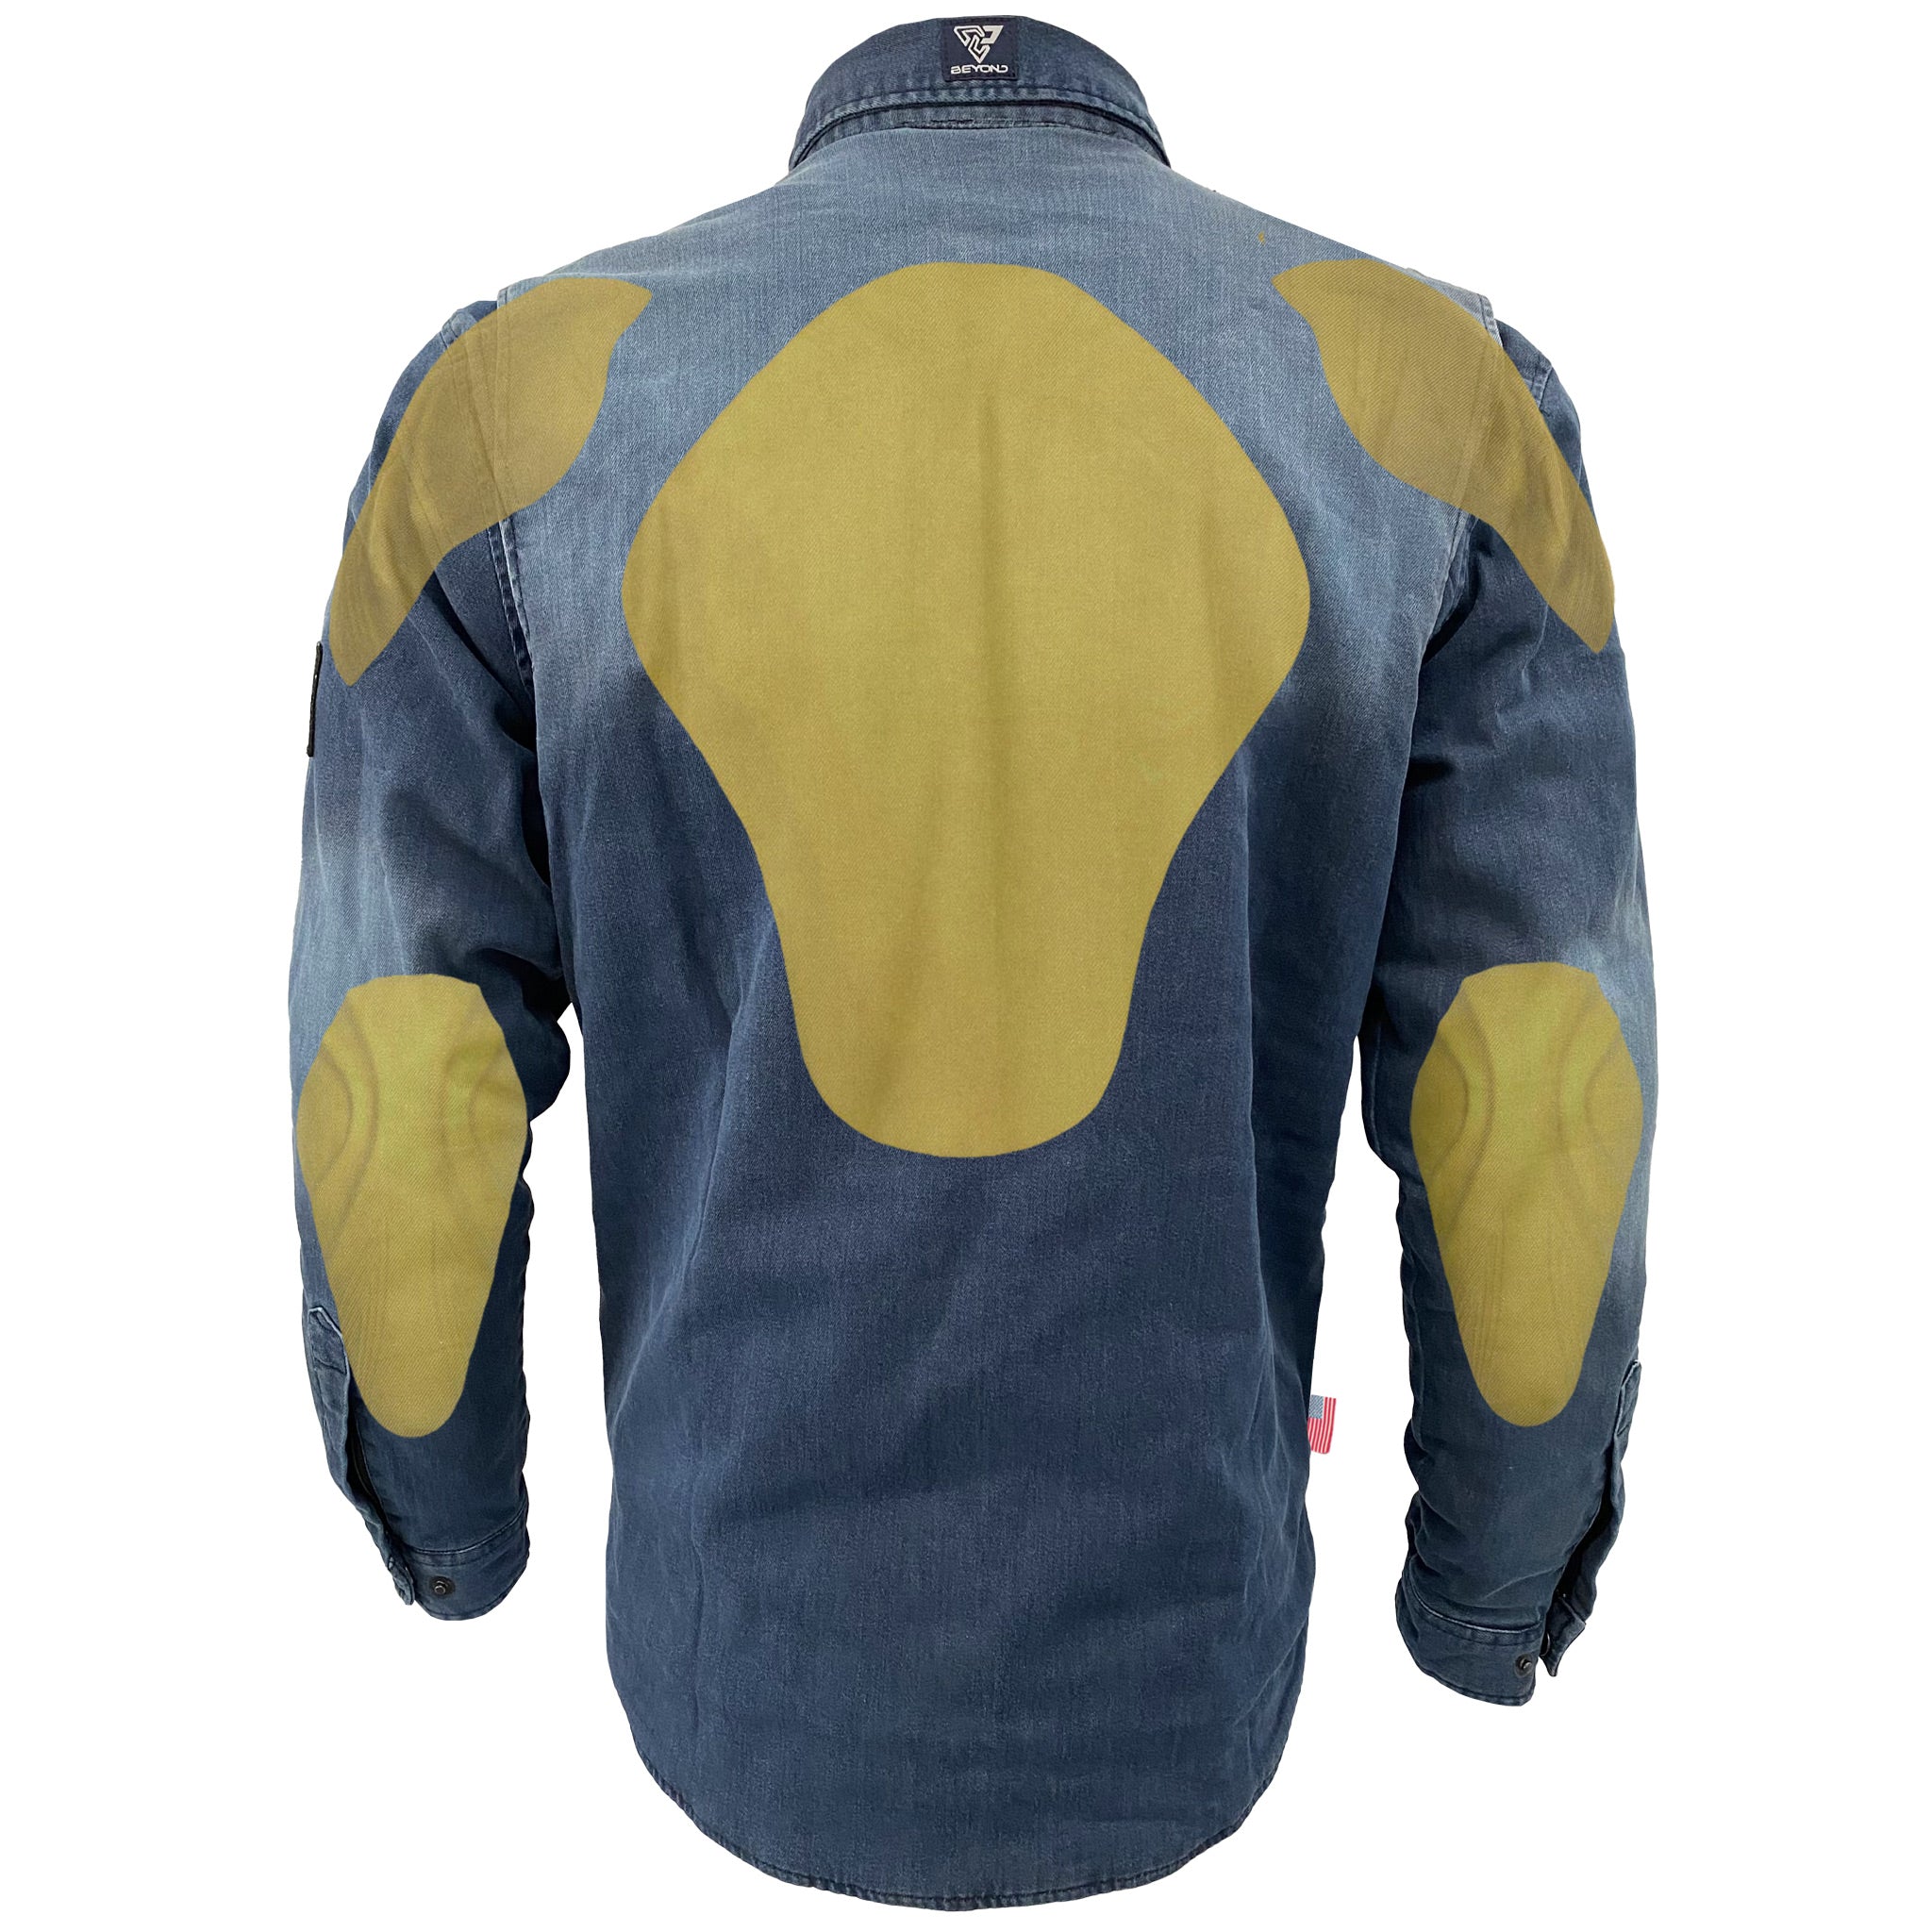 Protective Jeans Jacket - Blue Faded